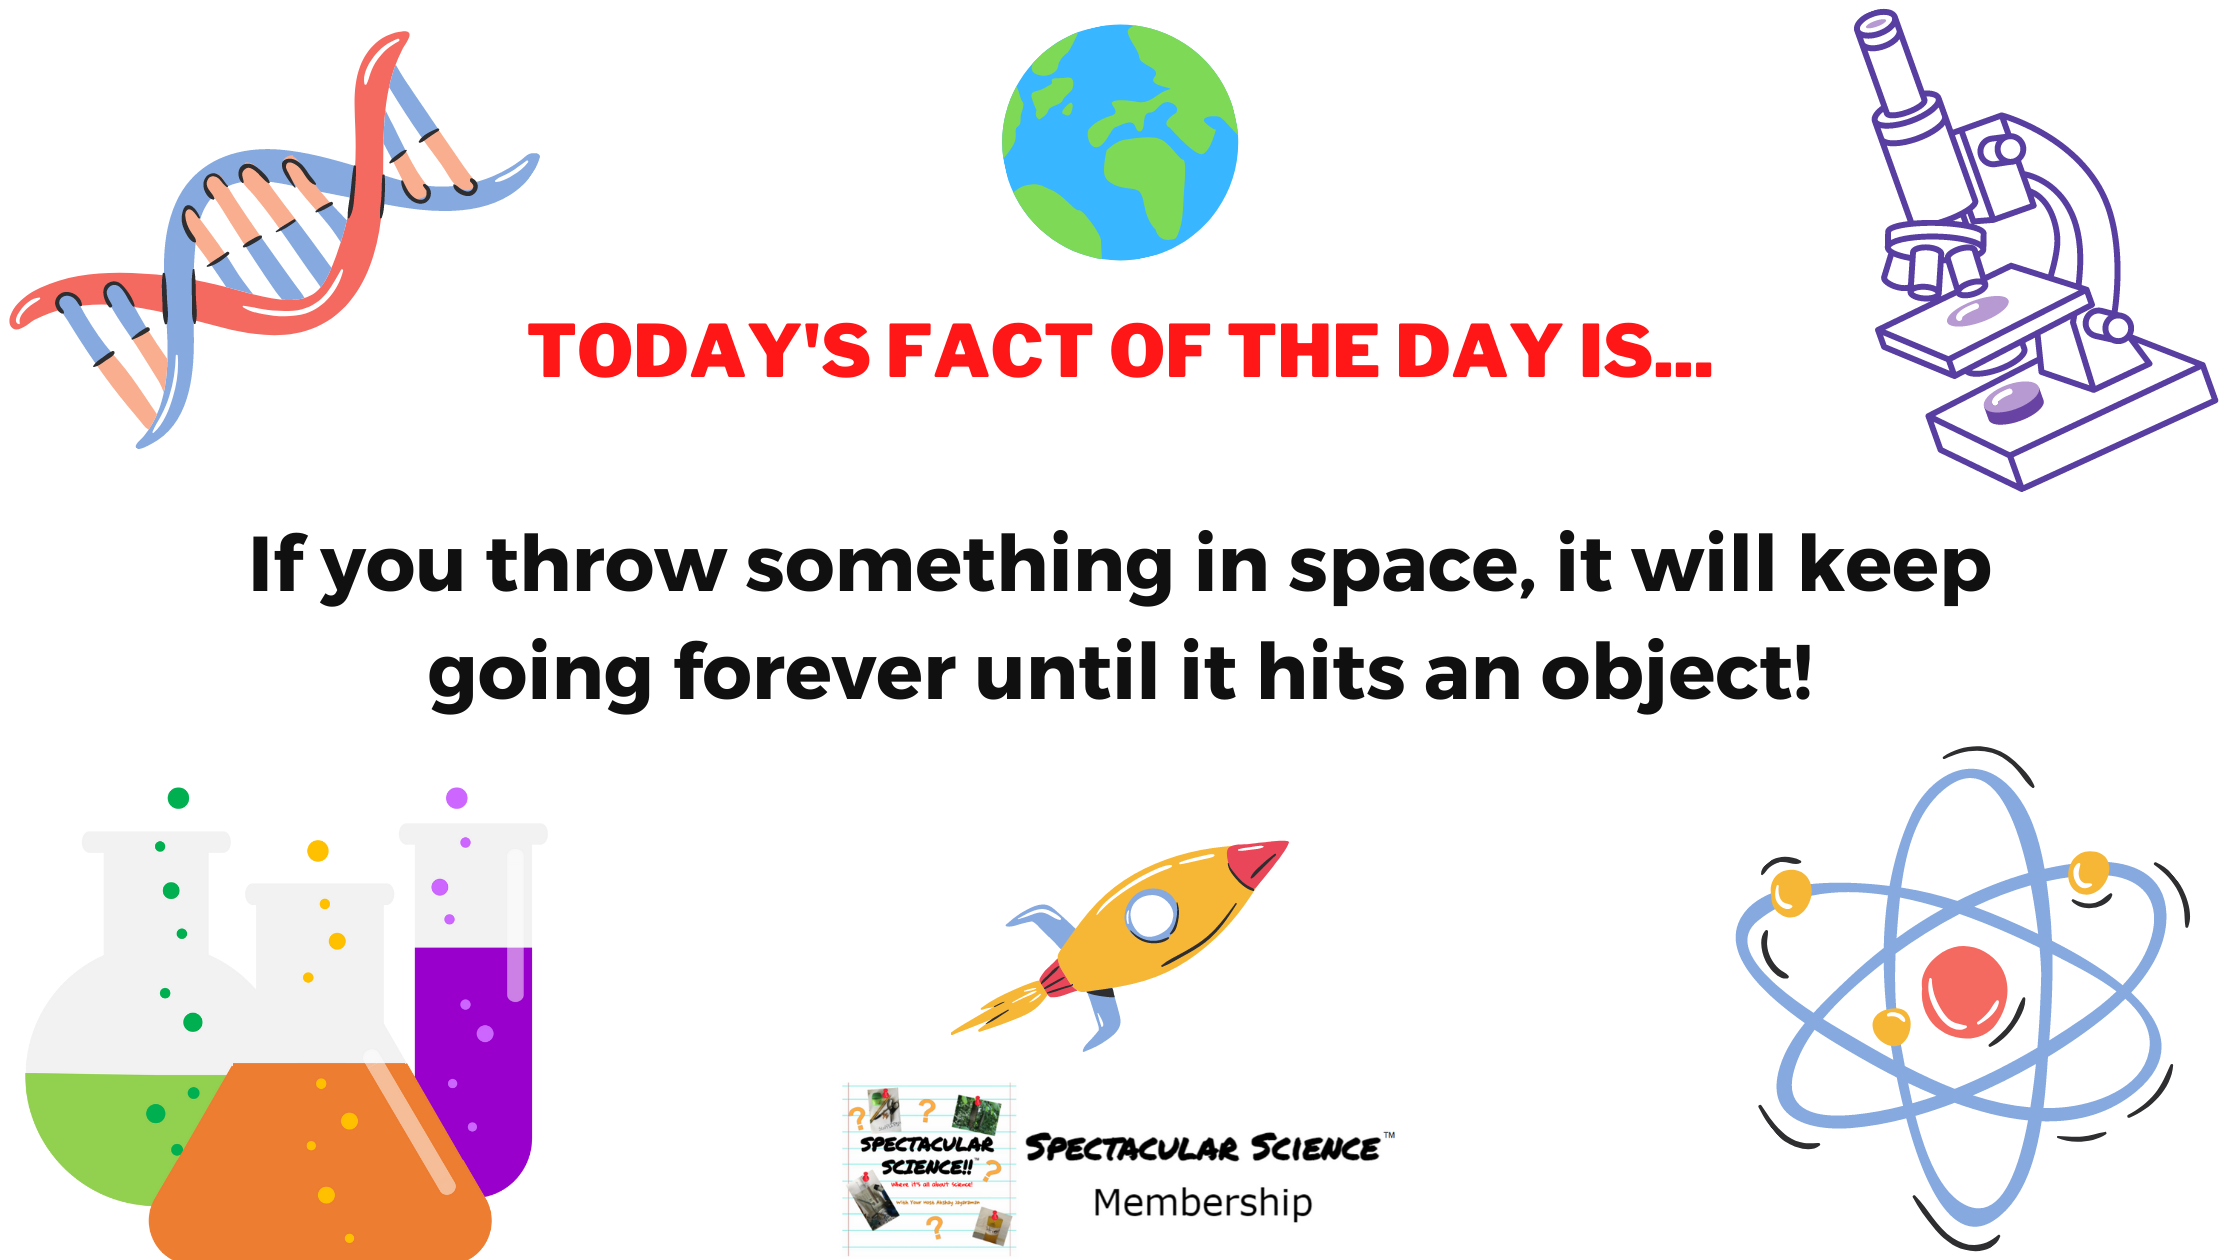 Fact of the Day Image July 7th